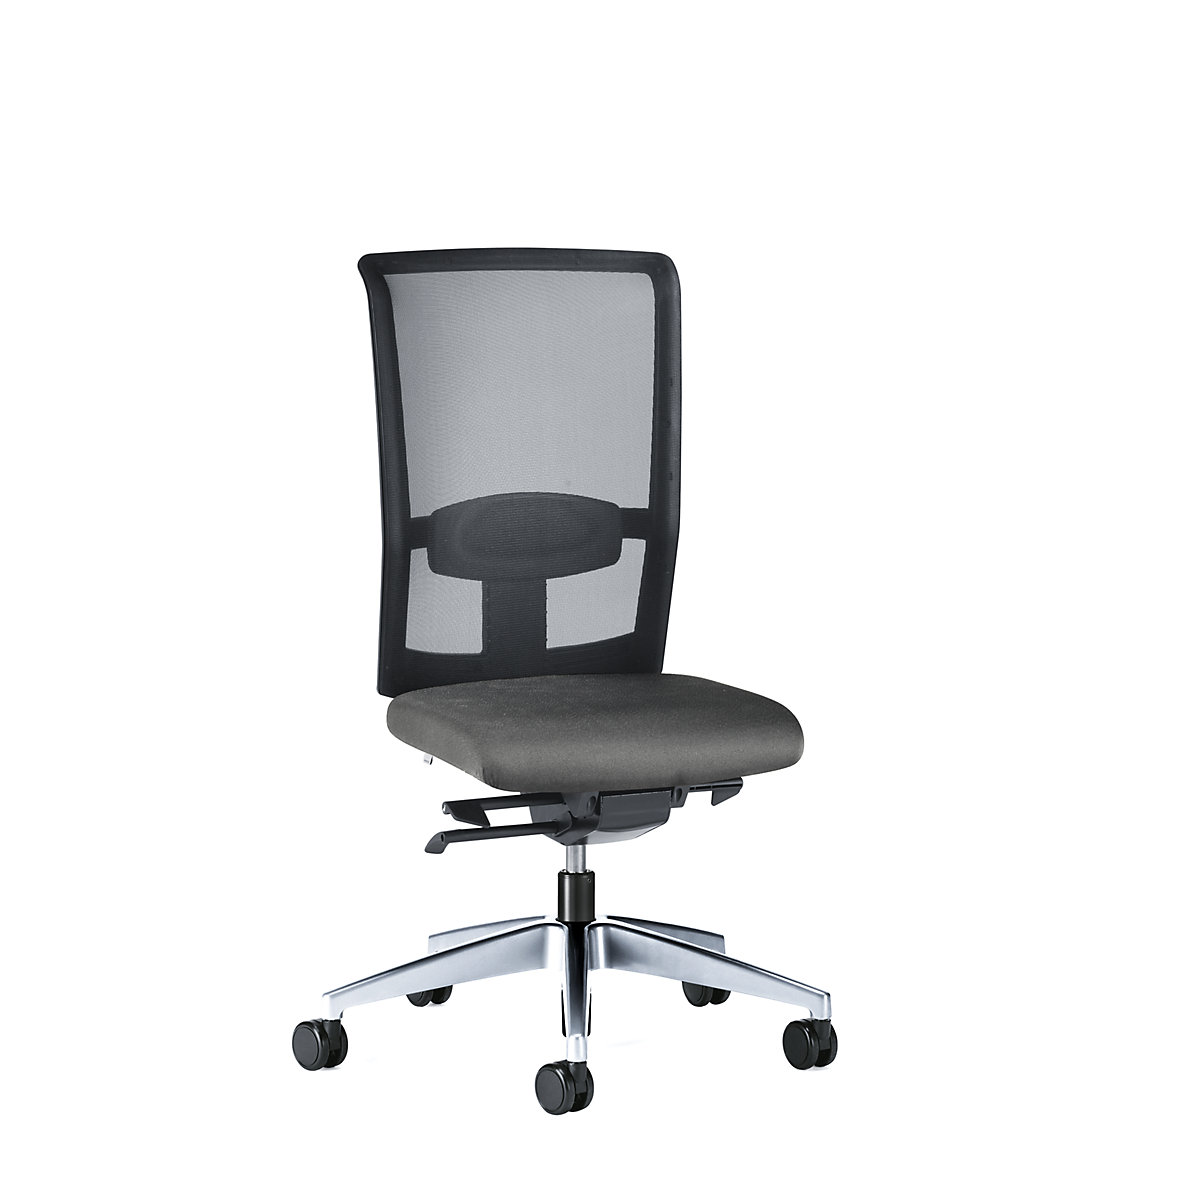 GOAL AIR office swivel chair, back rest height 545 mm – interstuhl, polished frame, with hard castors, iron grey, seat depth 410 mm-4